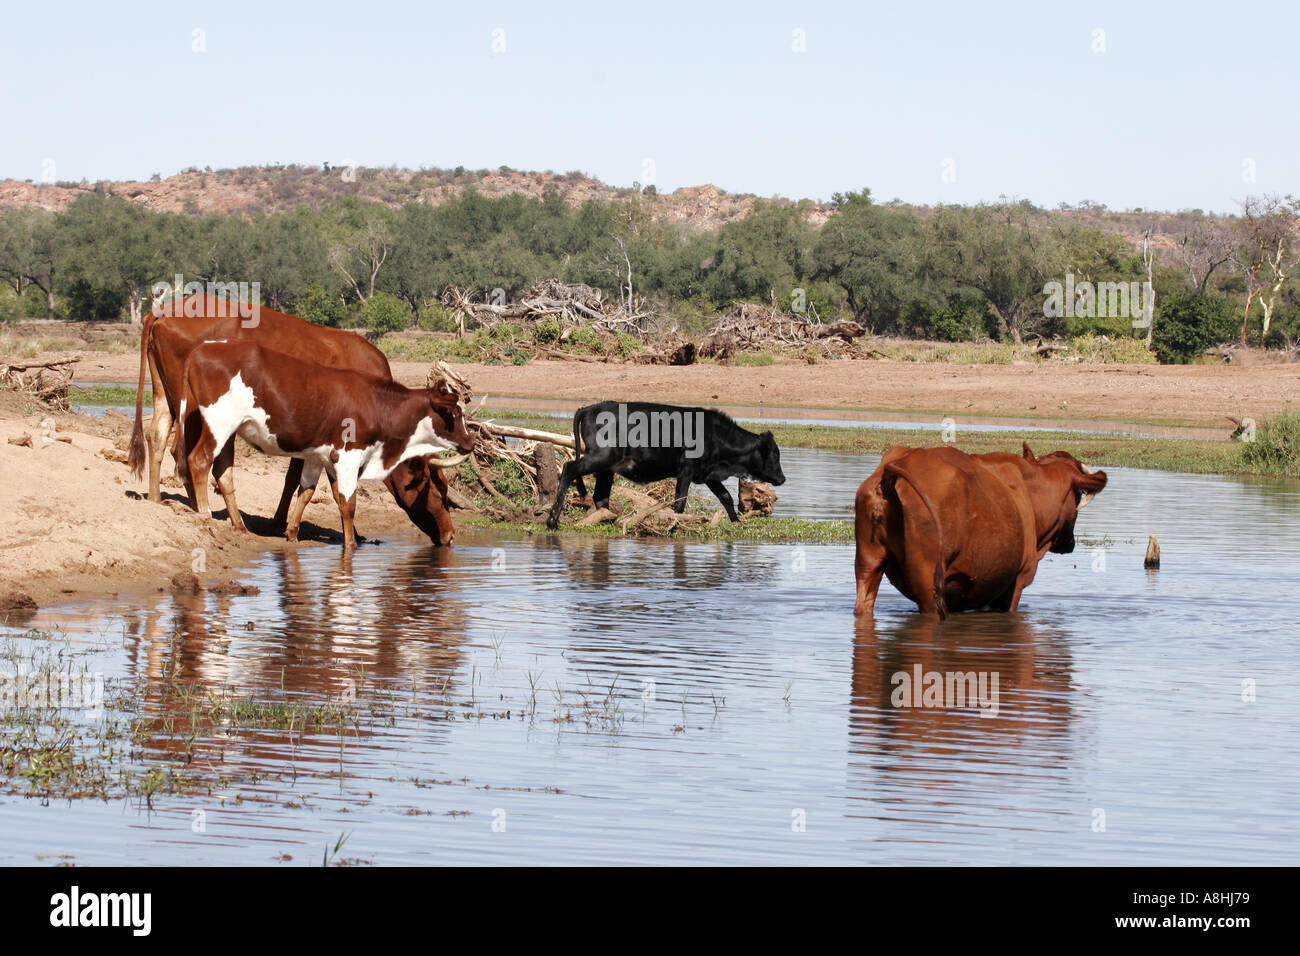 Cattle wading in water Stock Photo